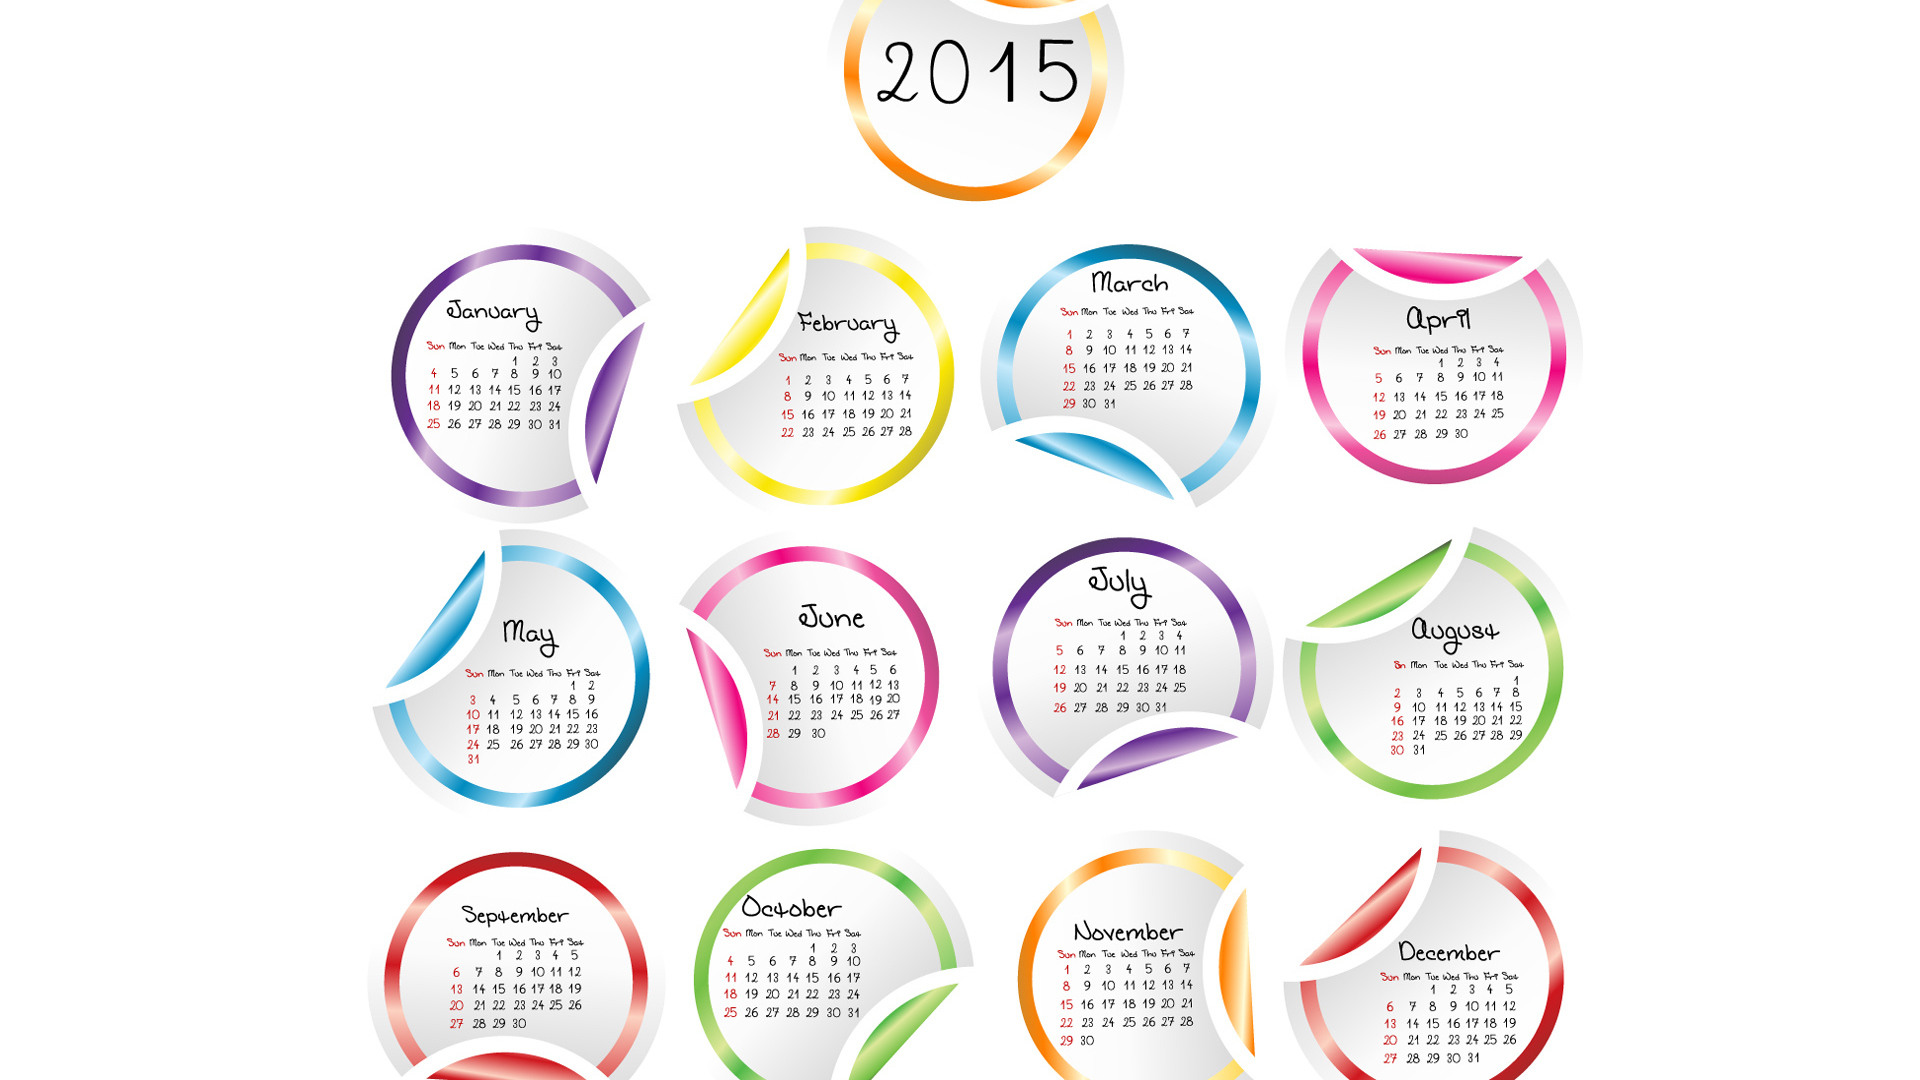 Calendar for the New Year 2015